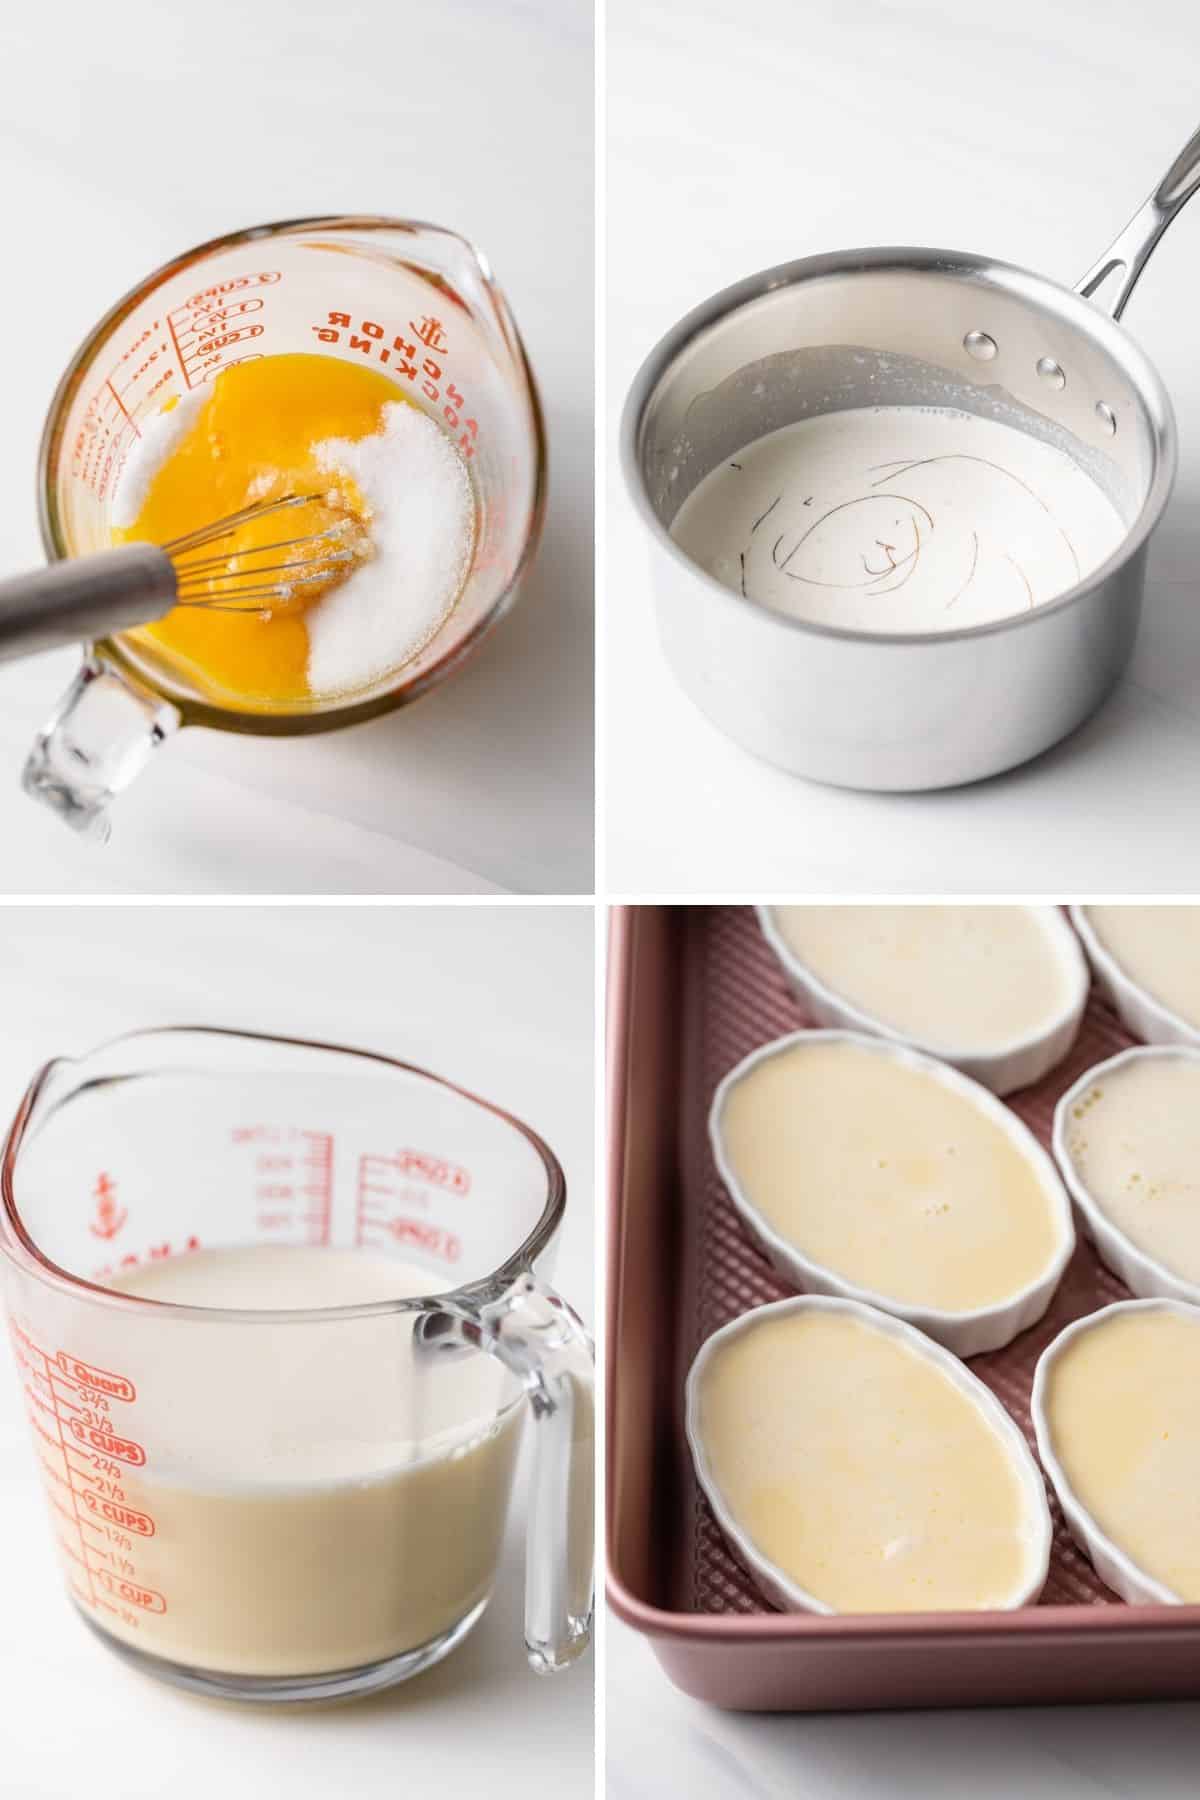 egg yolks and sugar in glass measuring cup with whisk, pot full of milk and cream, custard mixture in a glass measuring cup, and ramekins filled with custard in a pink baking pan